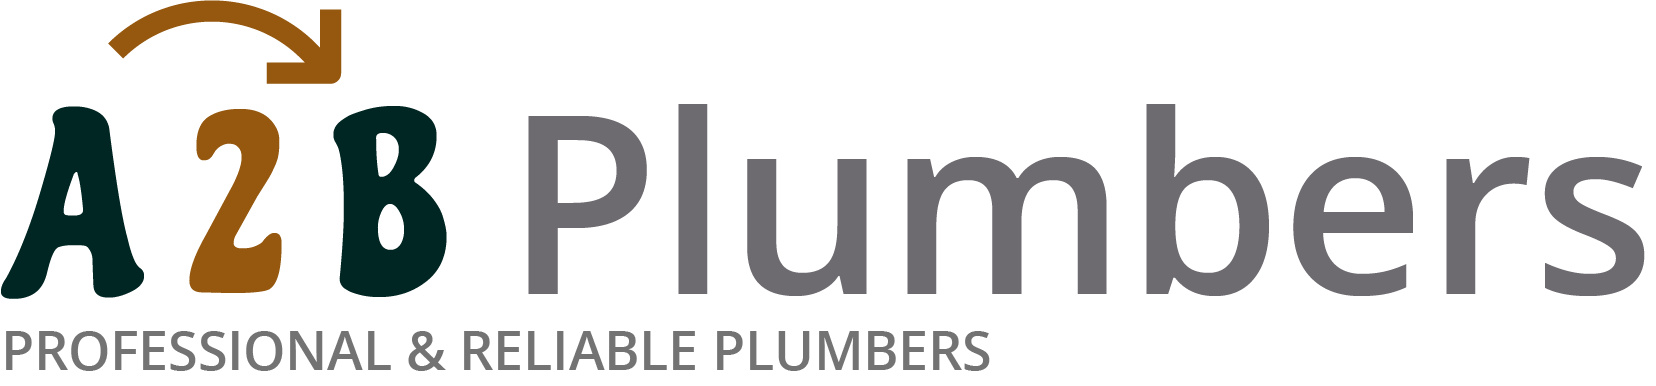 If you need a boiler installed, a radiator repaired or a leaking tap fixed, call us now - we provide services for properties in Hucknall and the local area.